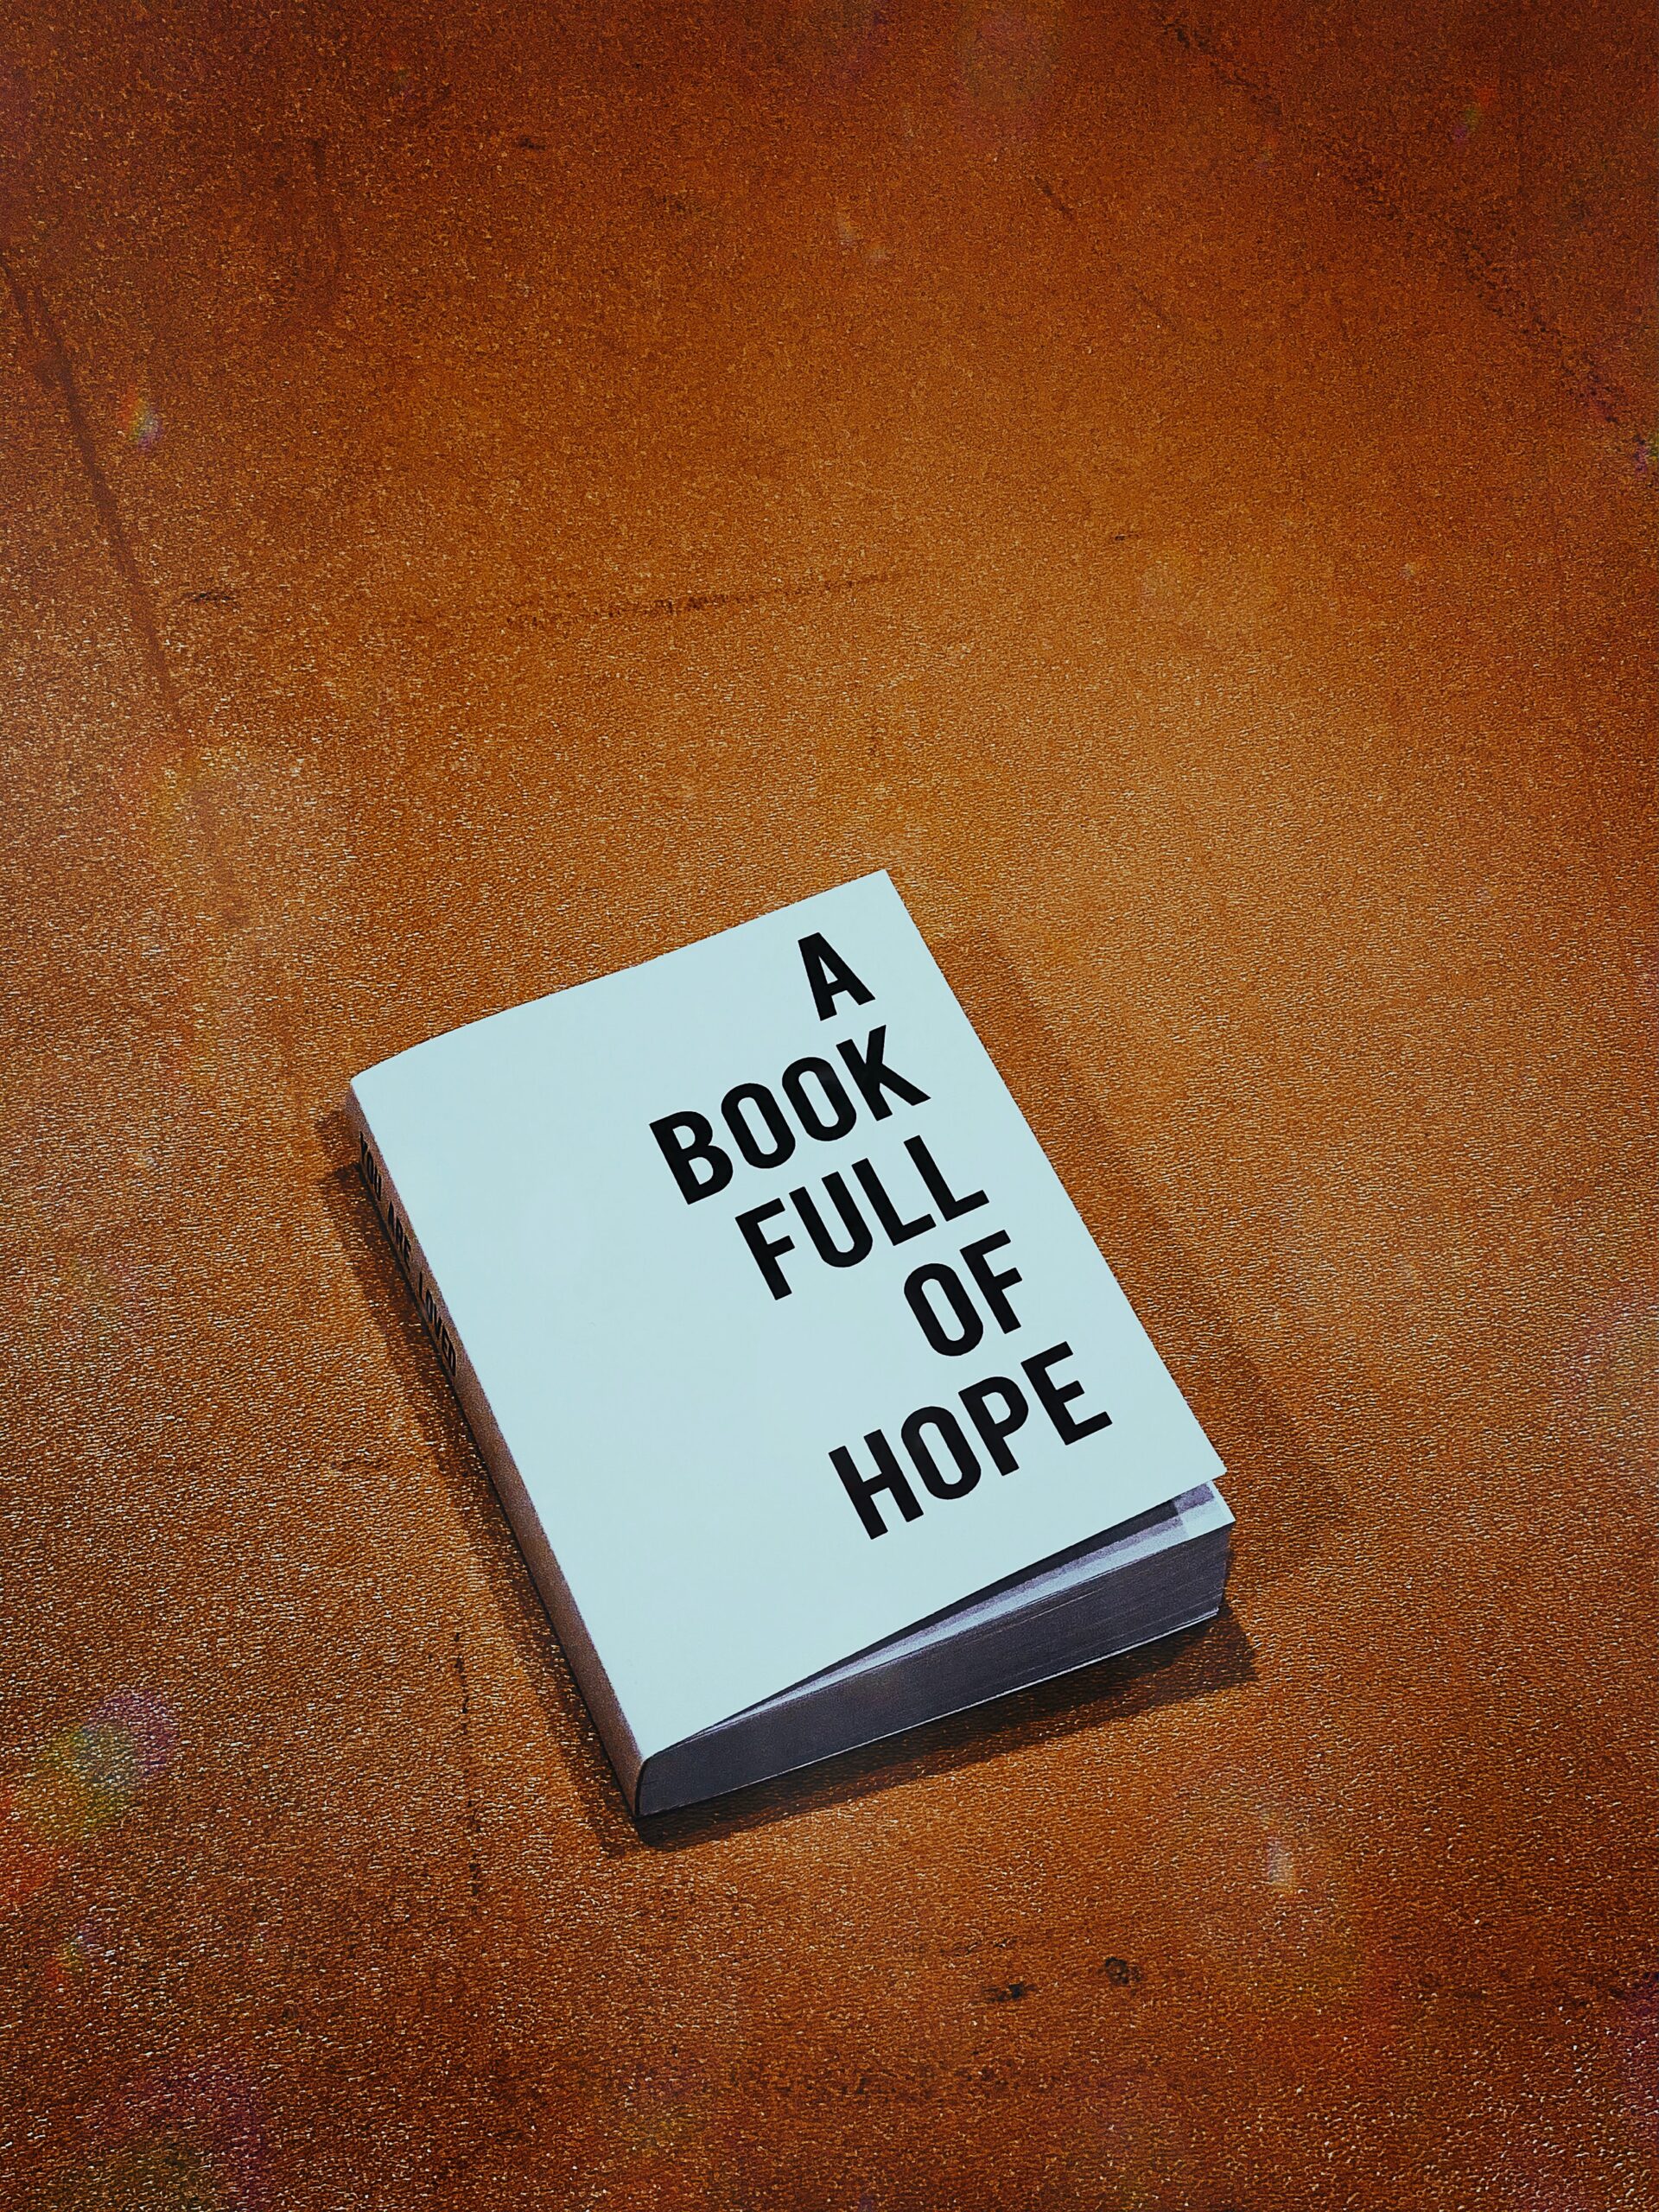 Picture of White Book with title Book of Hope on a Brown Table